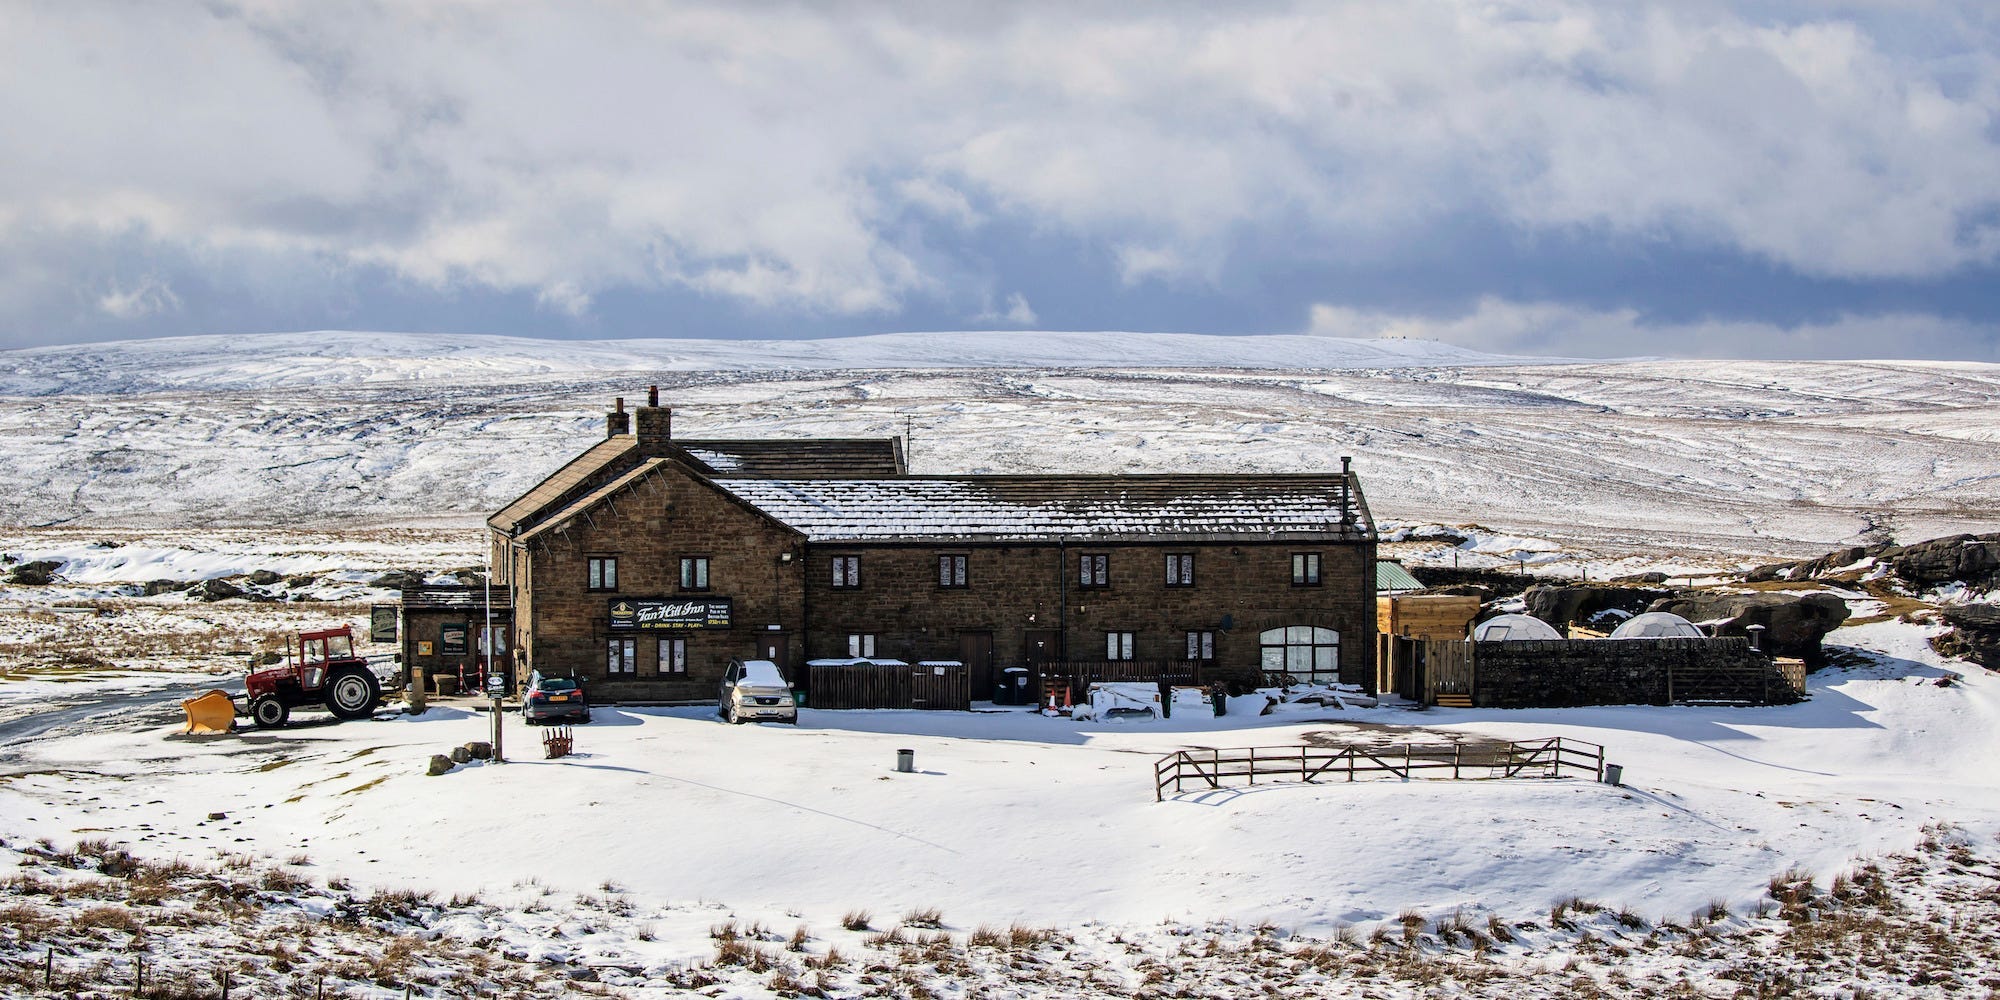 The Tan Hill Inn surrounded by snowy fields